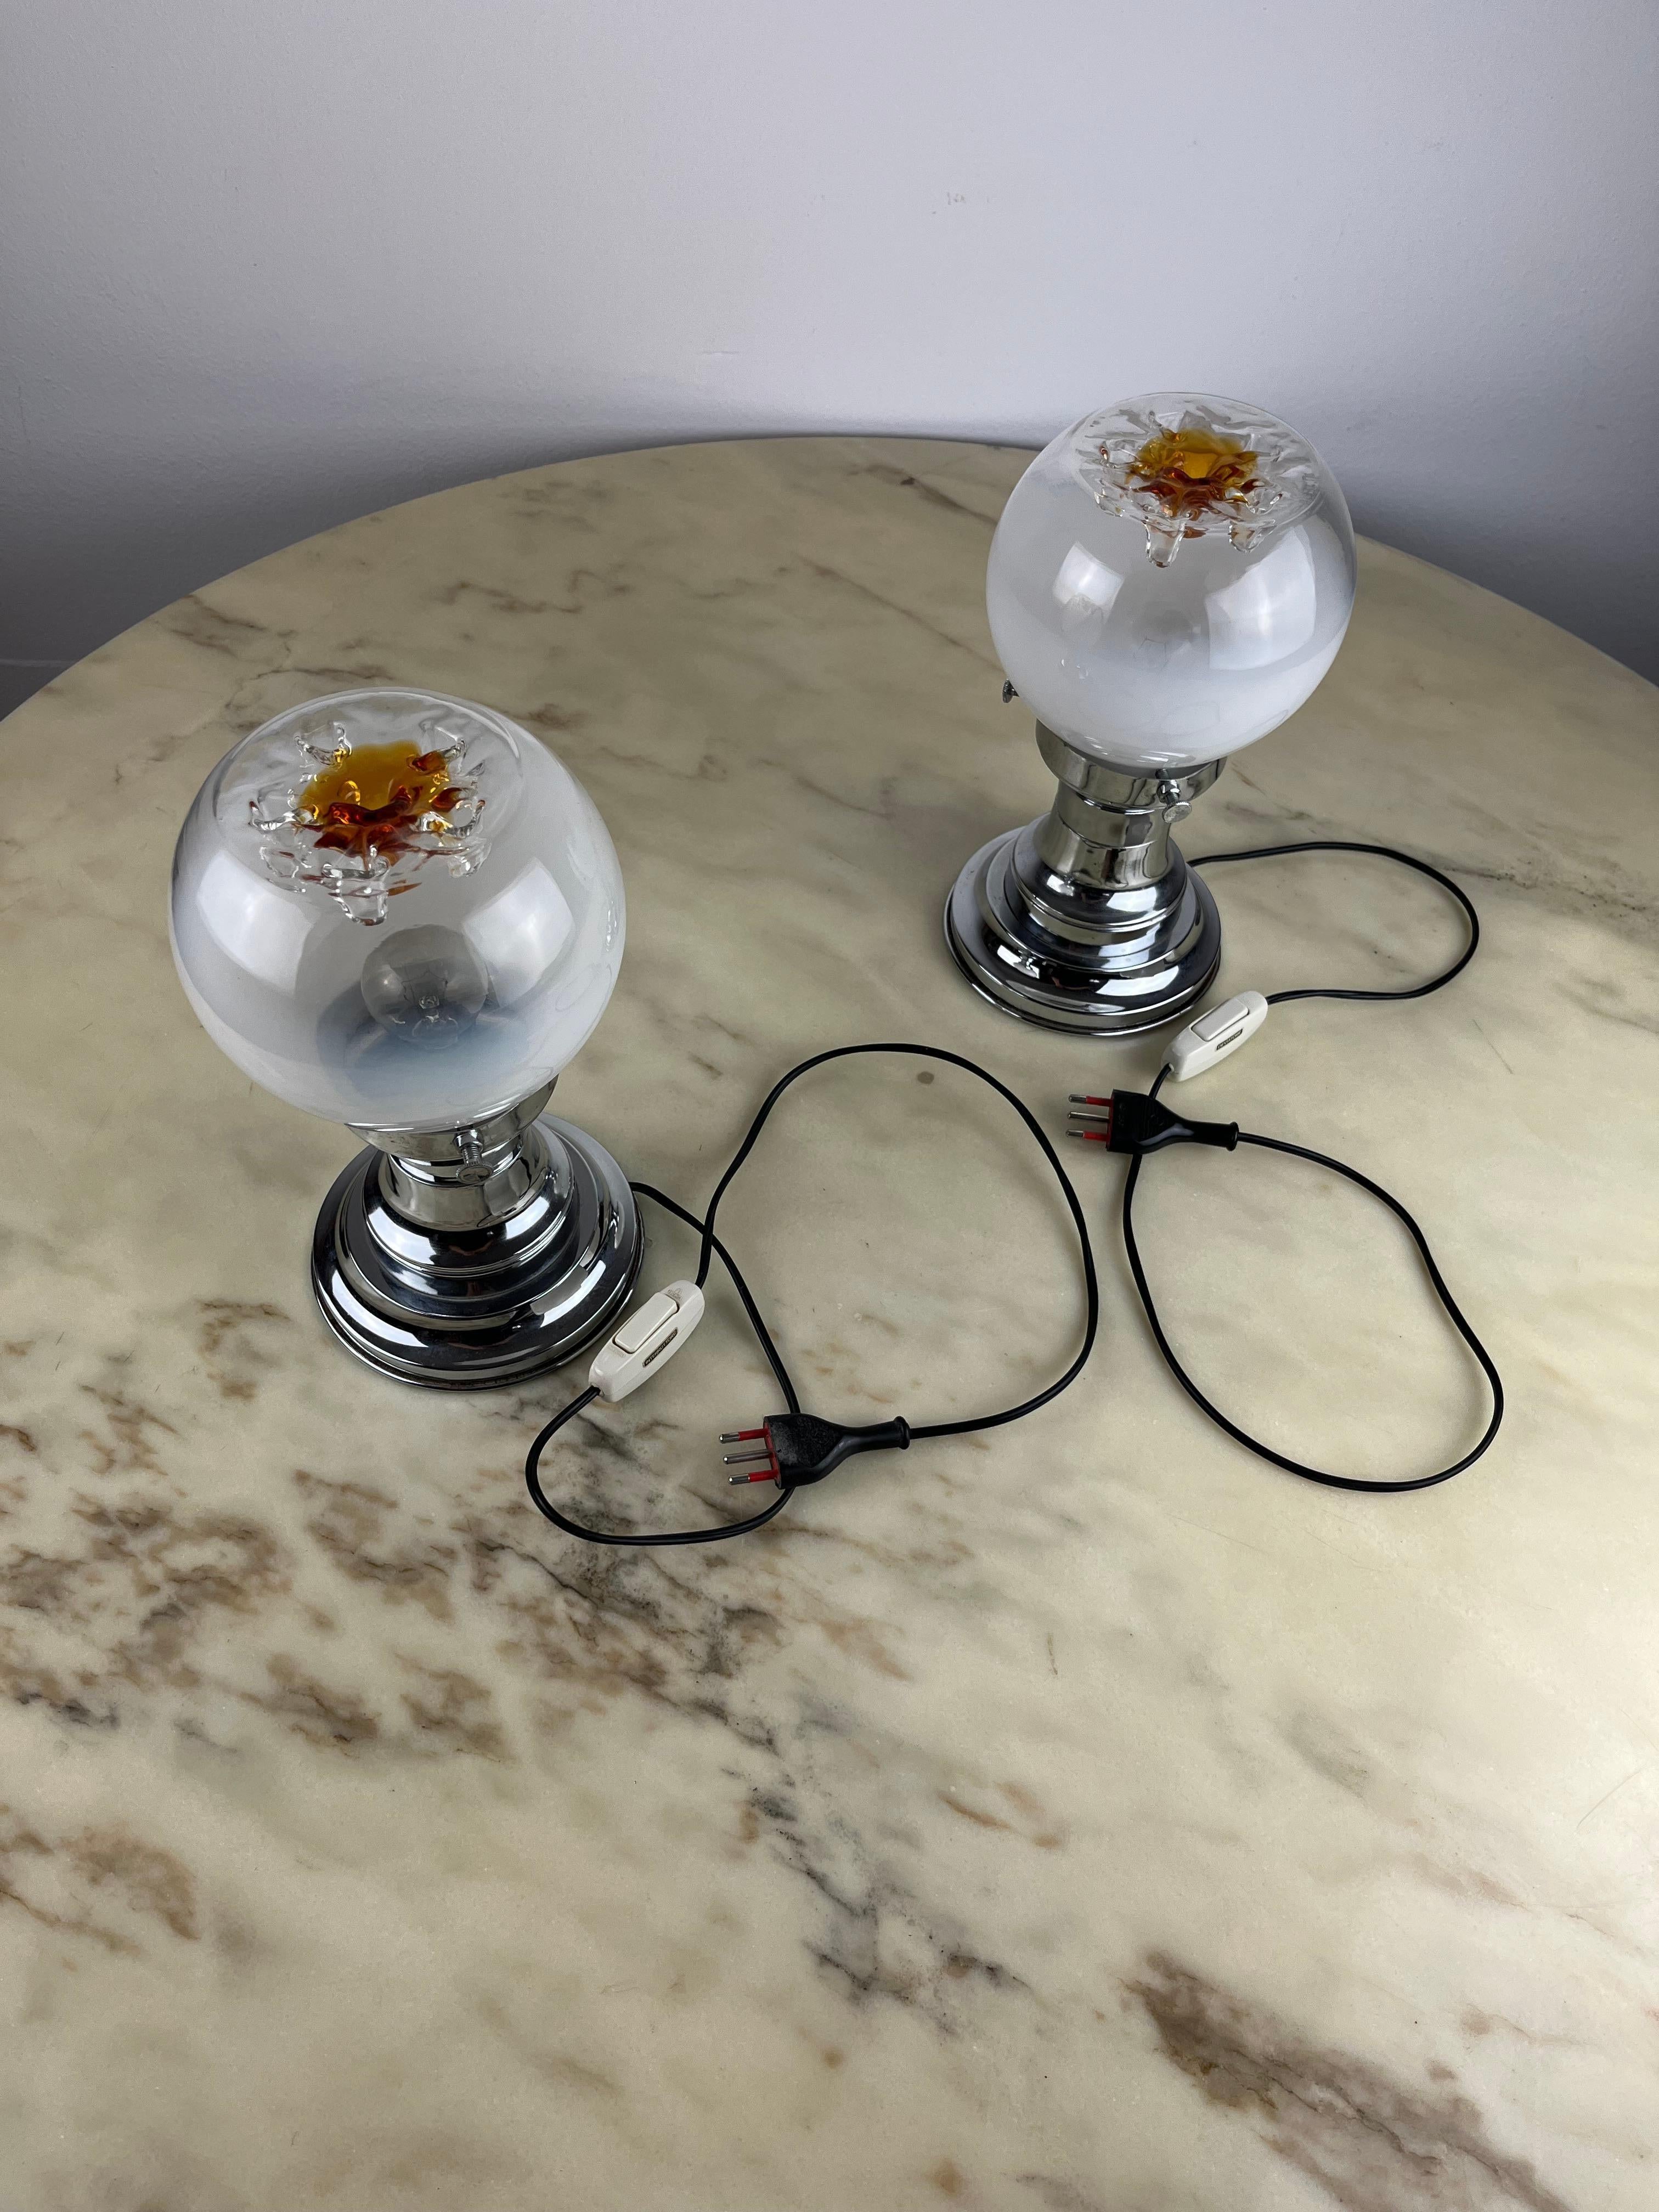 Pair of bedside lamps by Toni Zuccheri for Mazzega, Italy, 1970s.
Belonged to my grandparents and purchased in Venice.
Working and intact glass.
Small signs of time and use.


We guarantee adequate packaging and will ship via DHL, insuring the